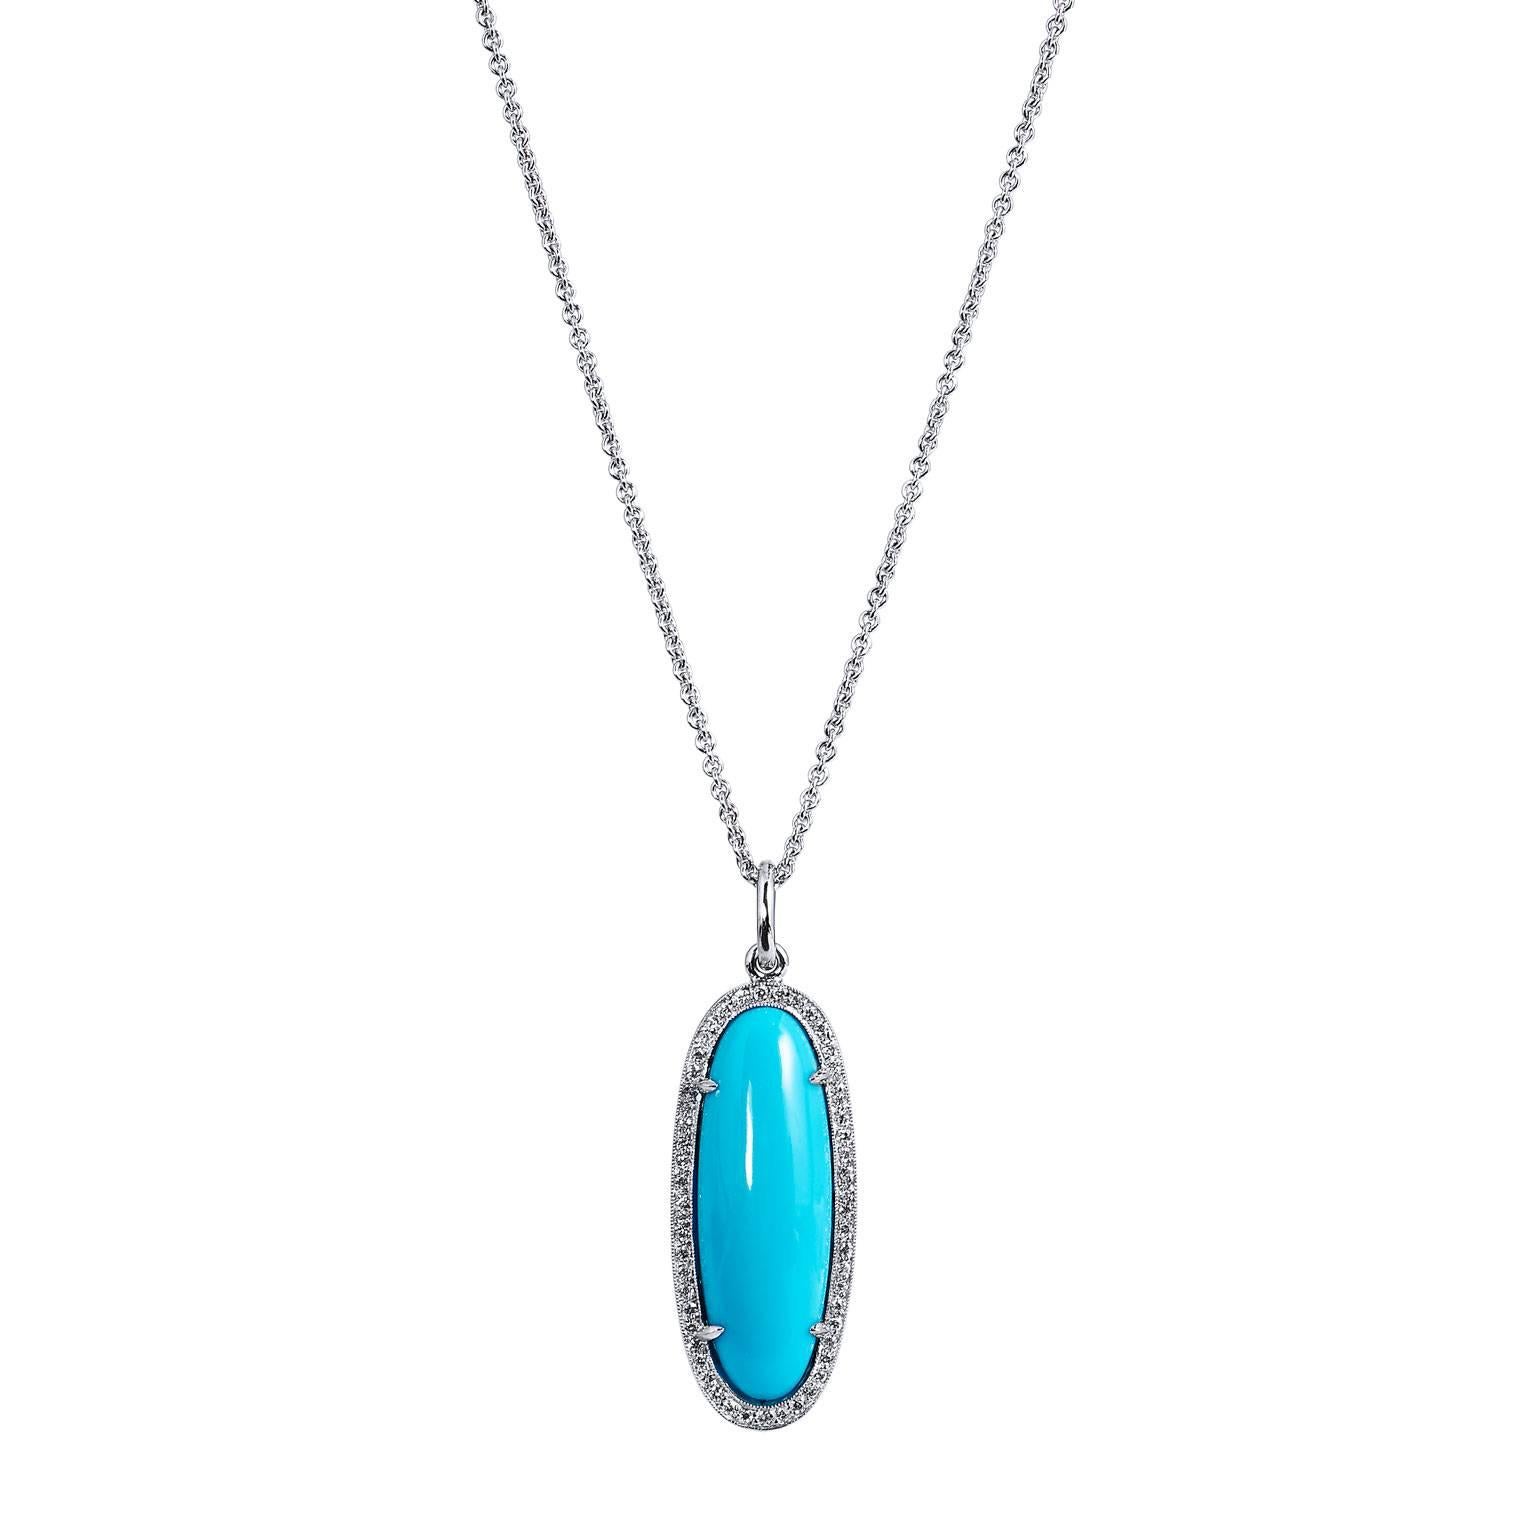 H & H Synthetic Turquoise White Gold Pendant Necklace